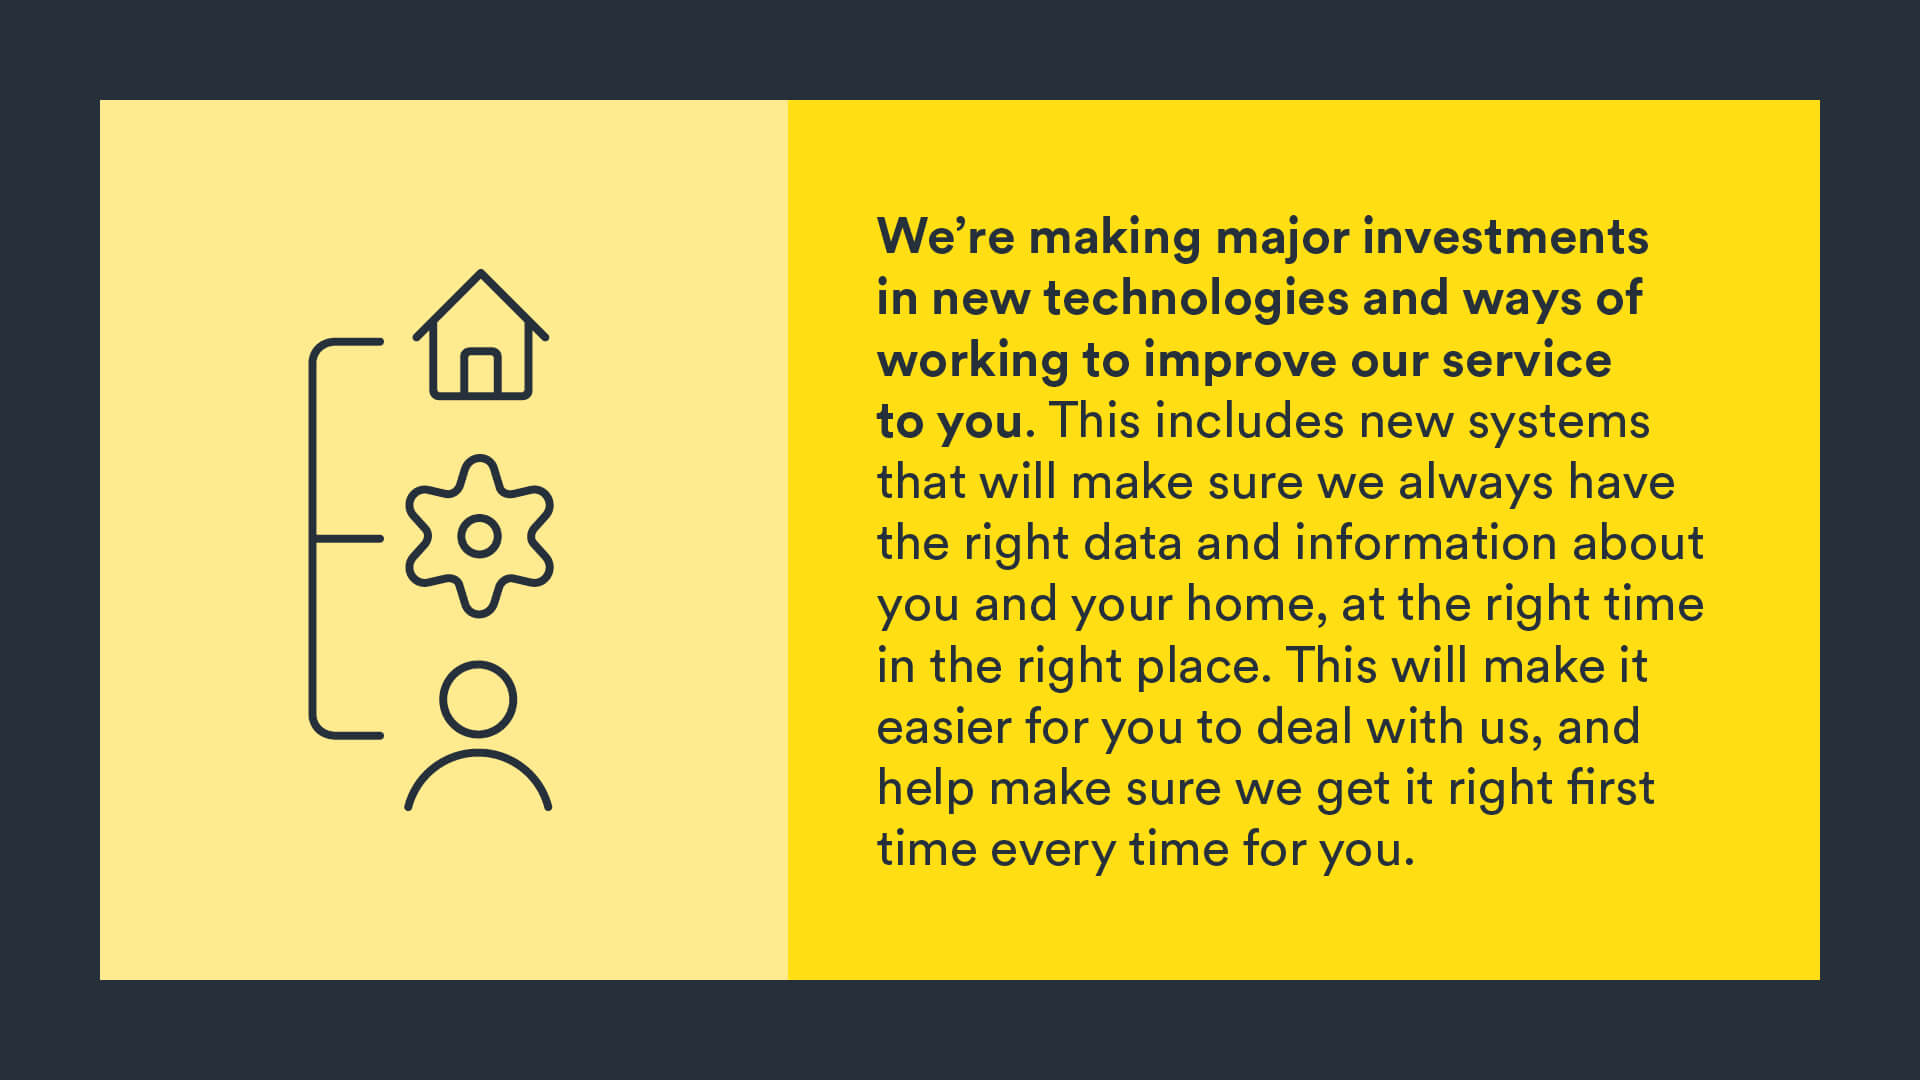 Infographic: we’re making major investments in new technologies and ways of working to improve our service to you. This includes new systems that will make sure we always have the right data and information about you and your home, at the right time in the right place. This will make it easier for you to deal with us, and help make sure we get it right first time every time for you.